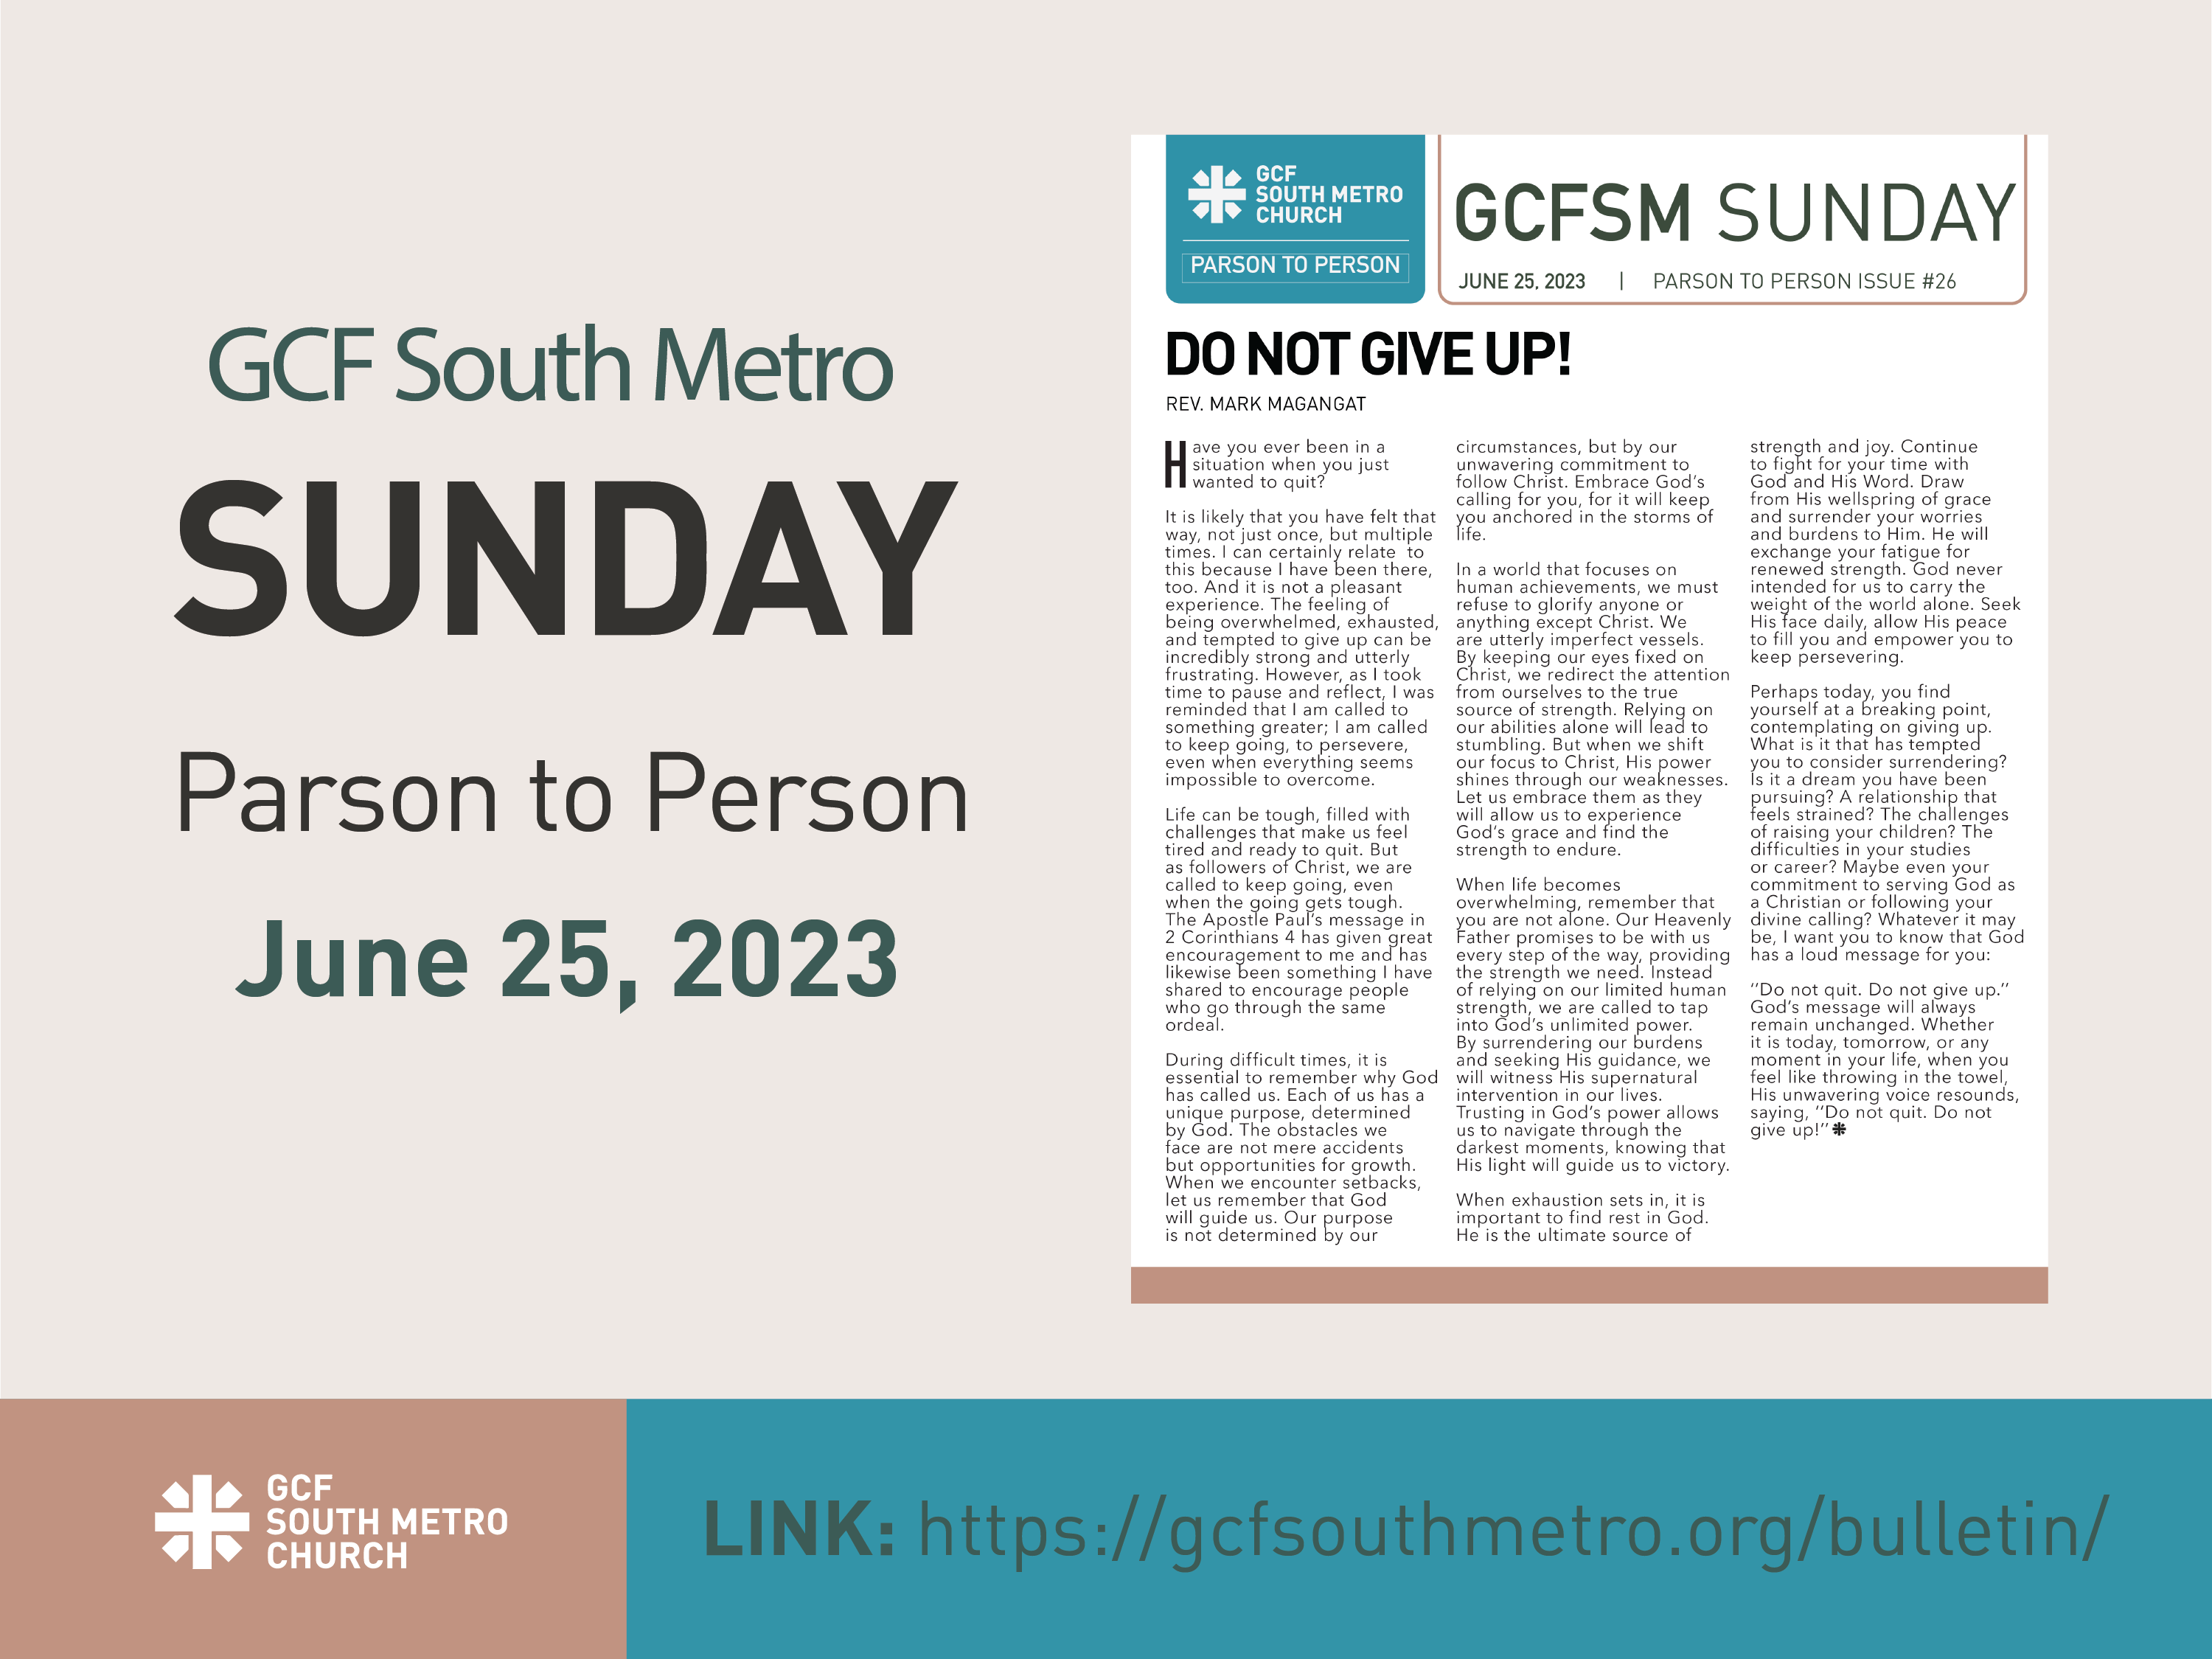 Sunday Bulletin – Parson to Person, June 25, 2023